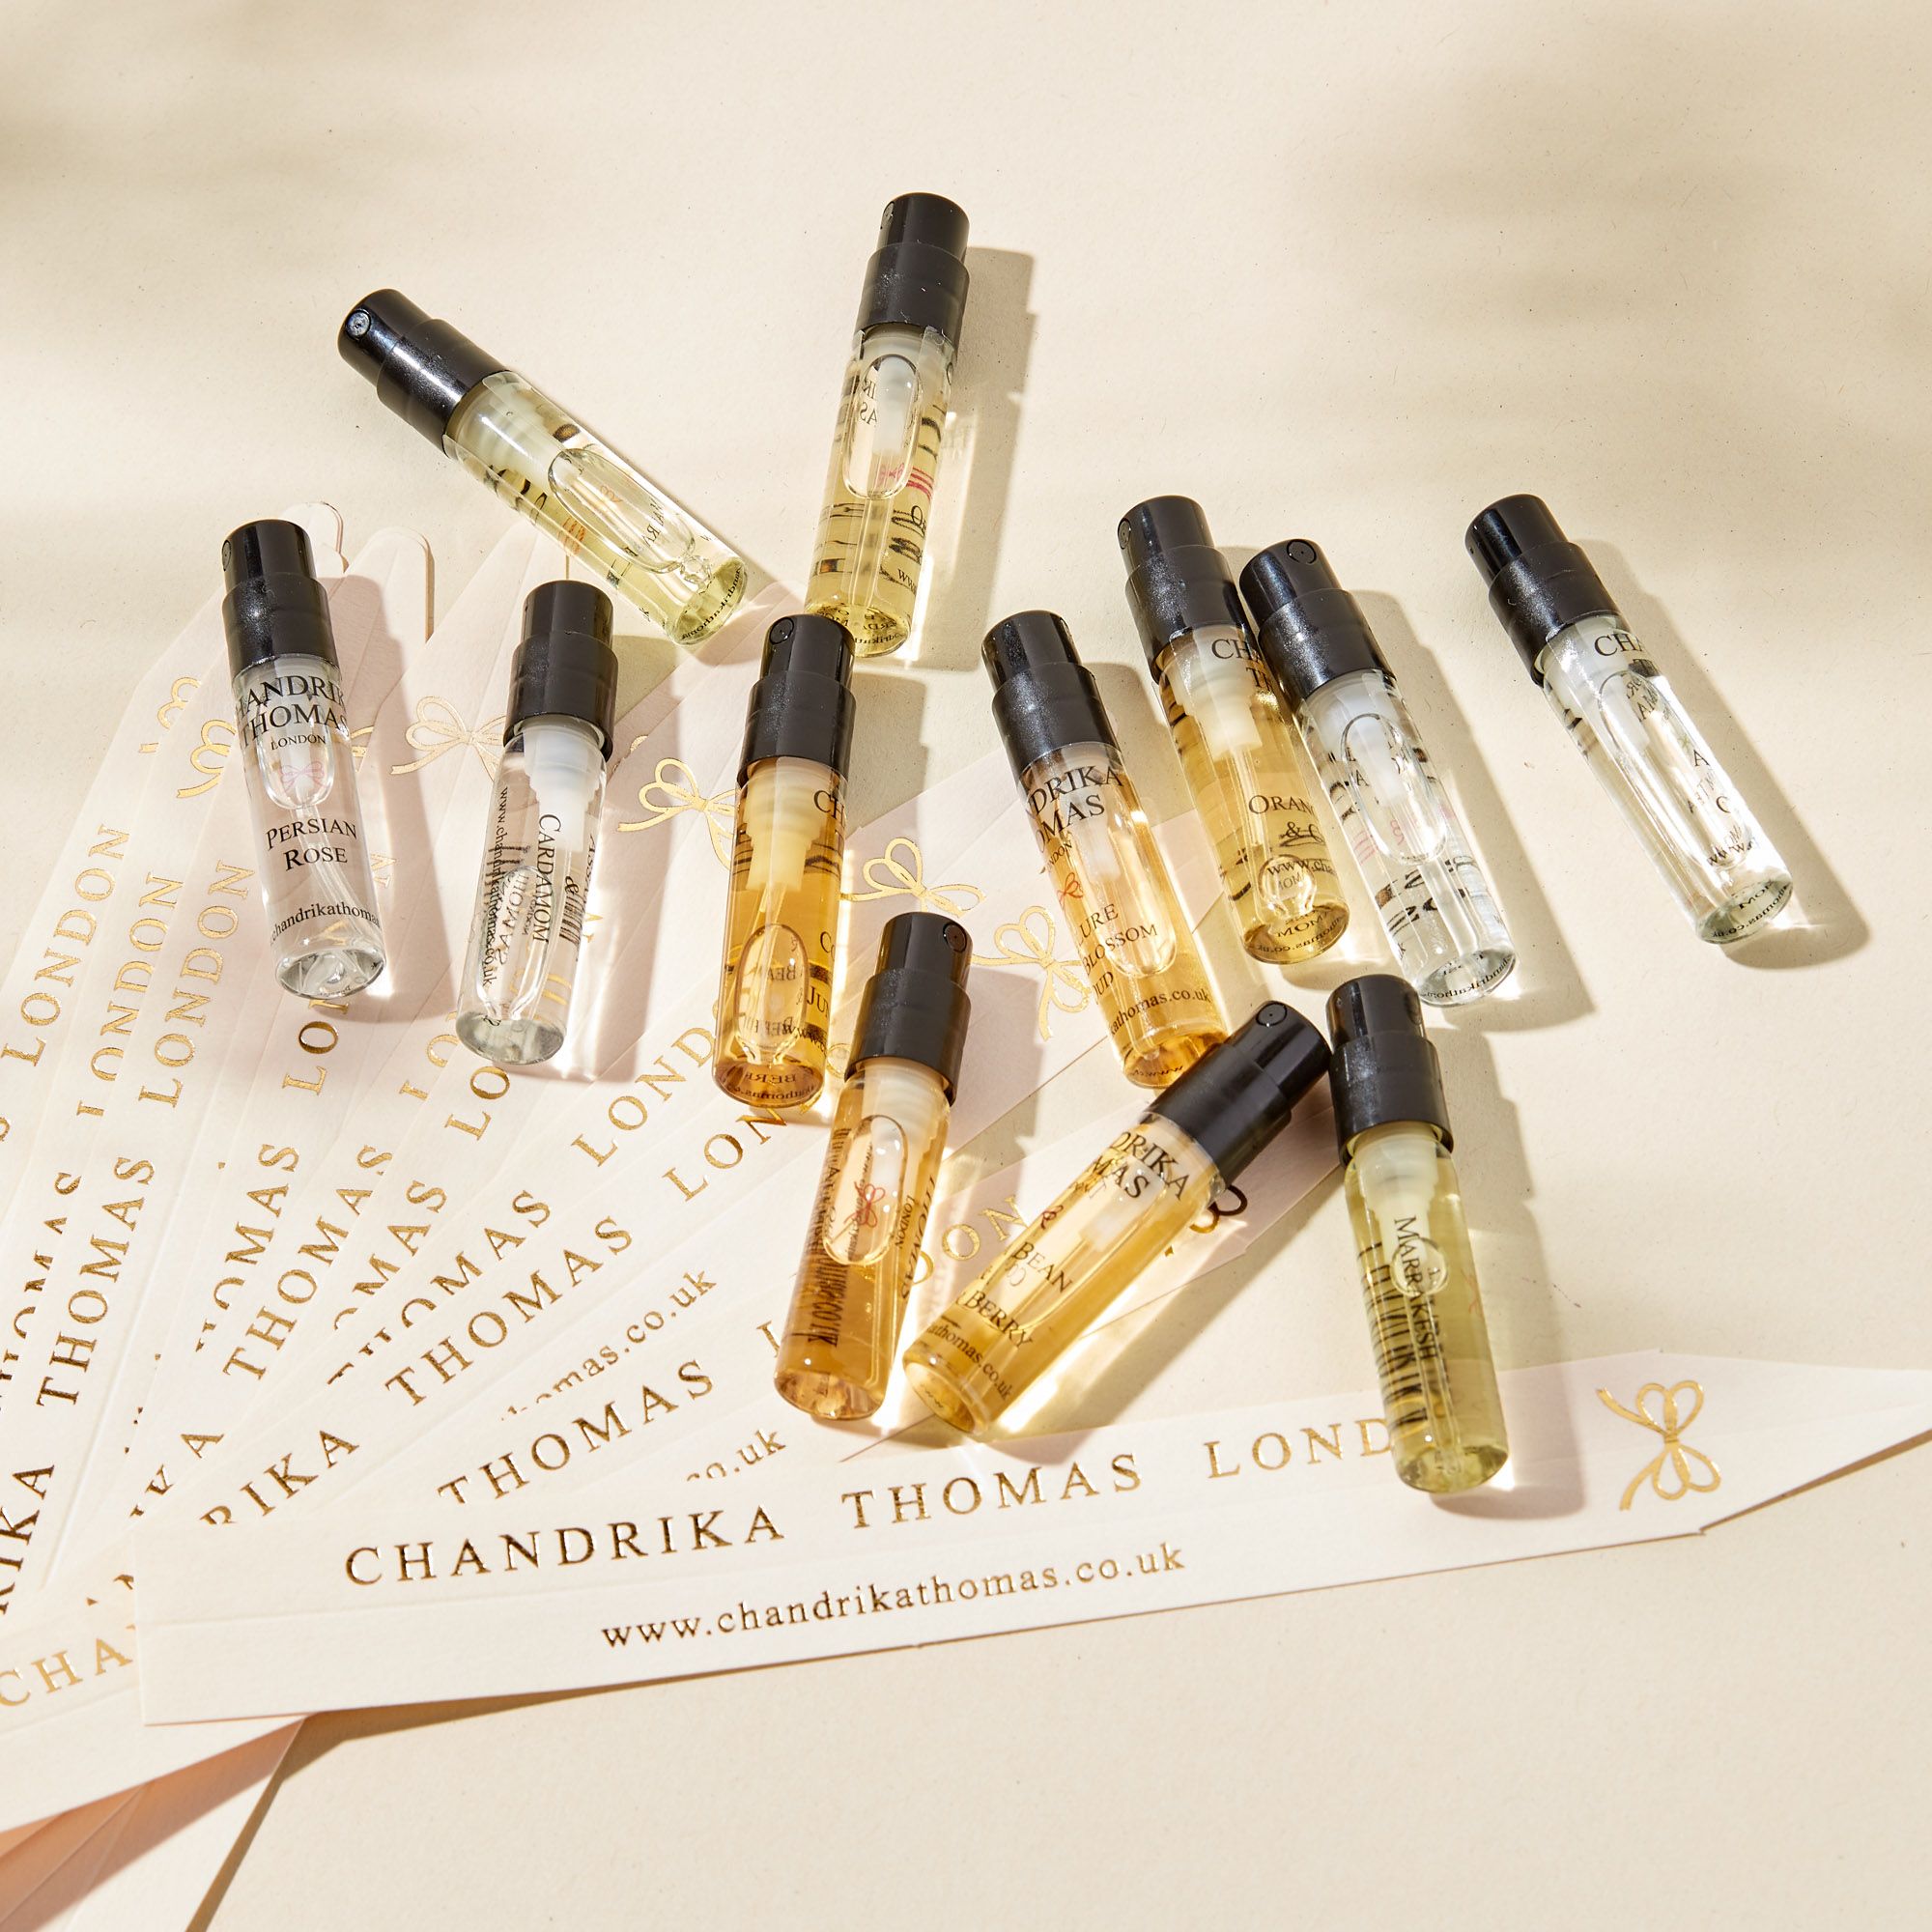 Discovery Perfume Samples